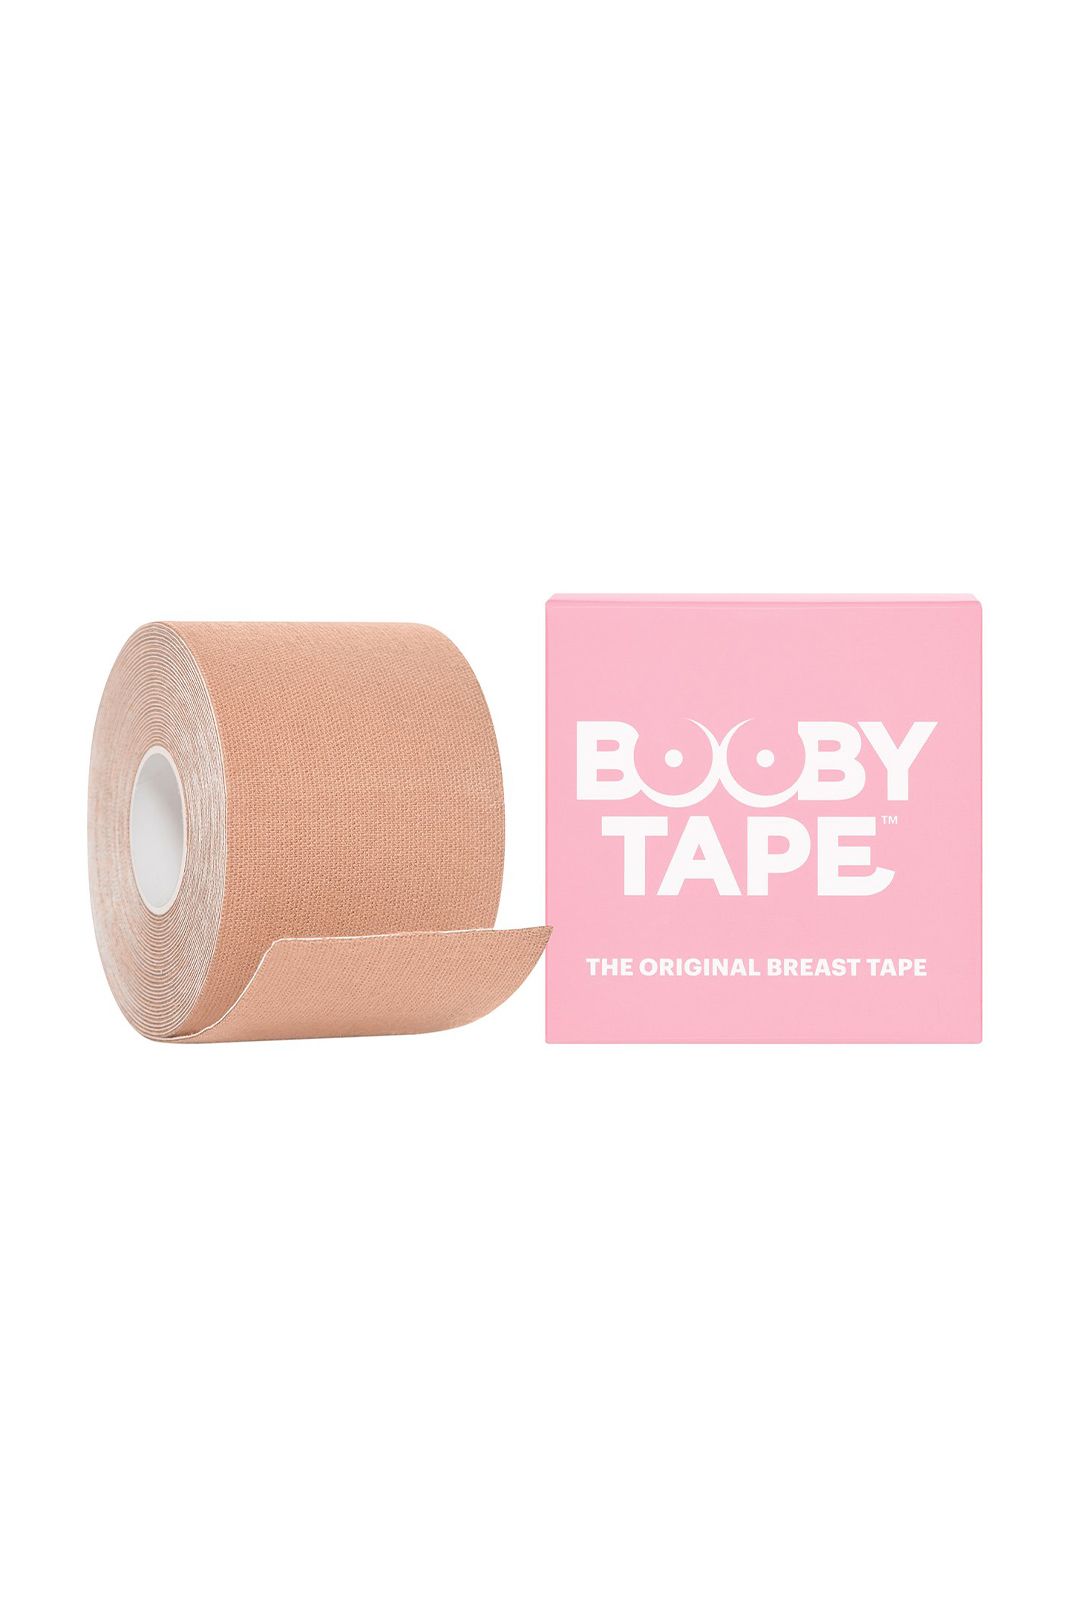 booby-tape-roll-beige-product